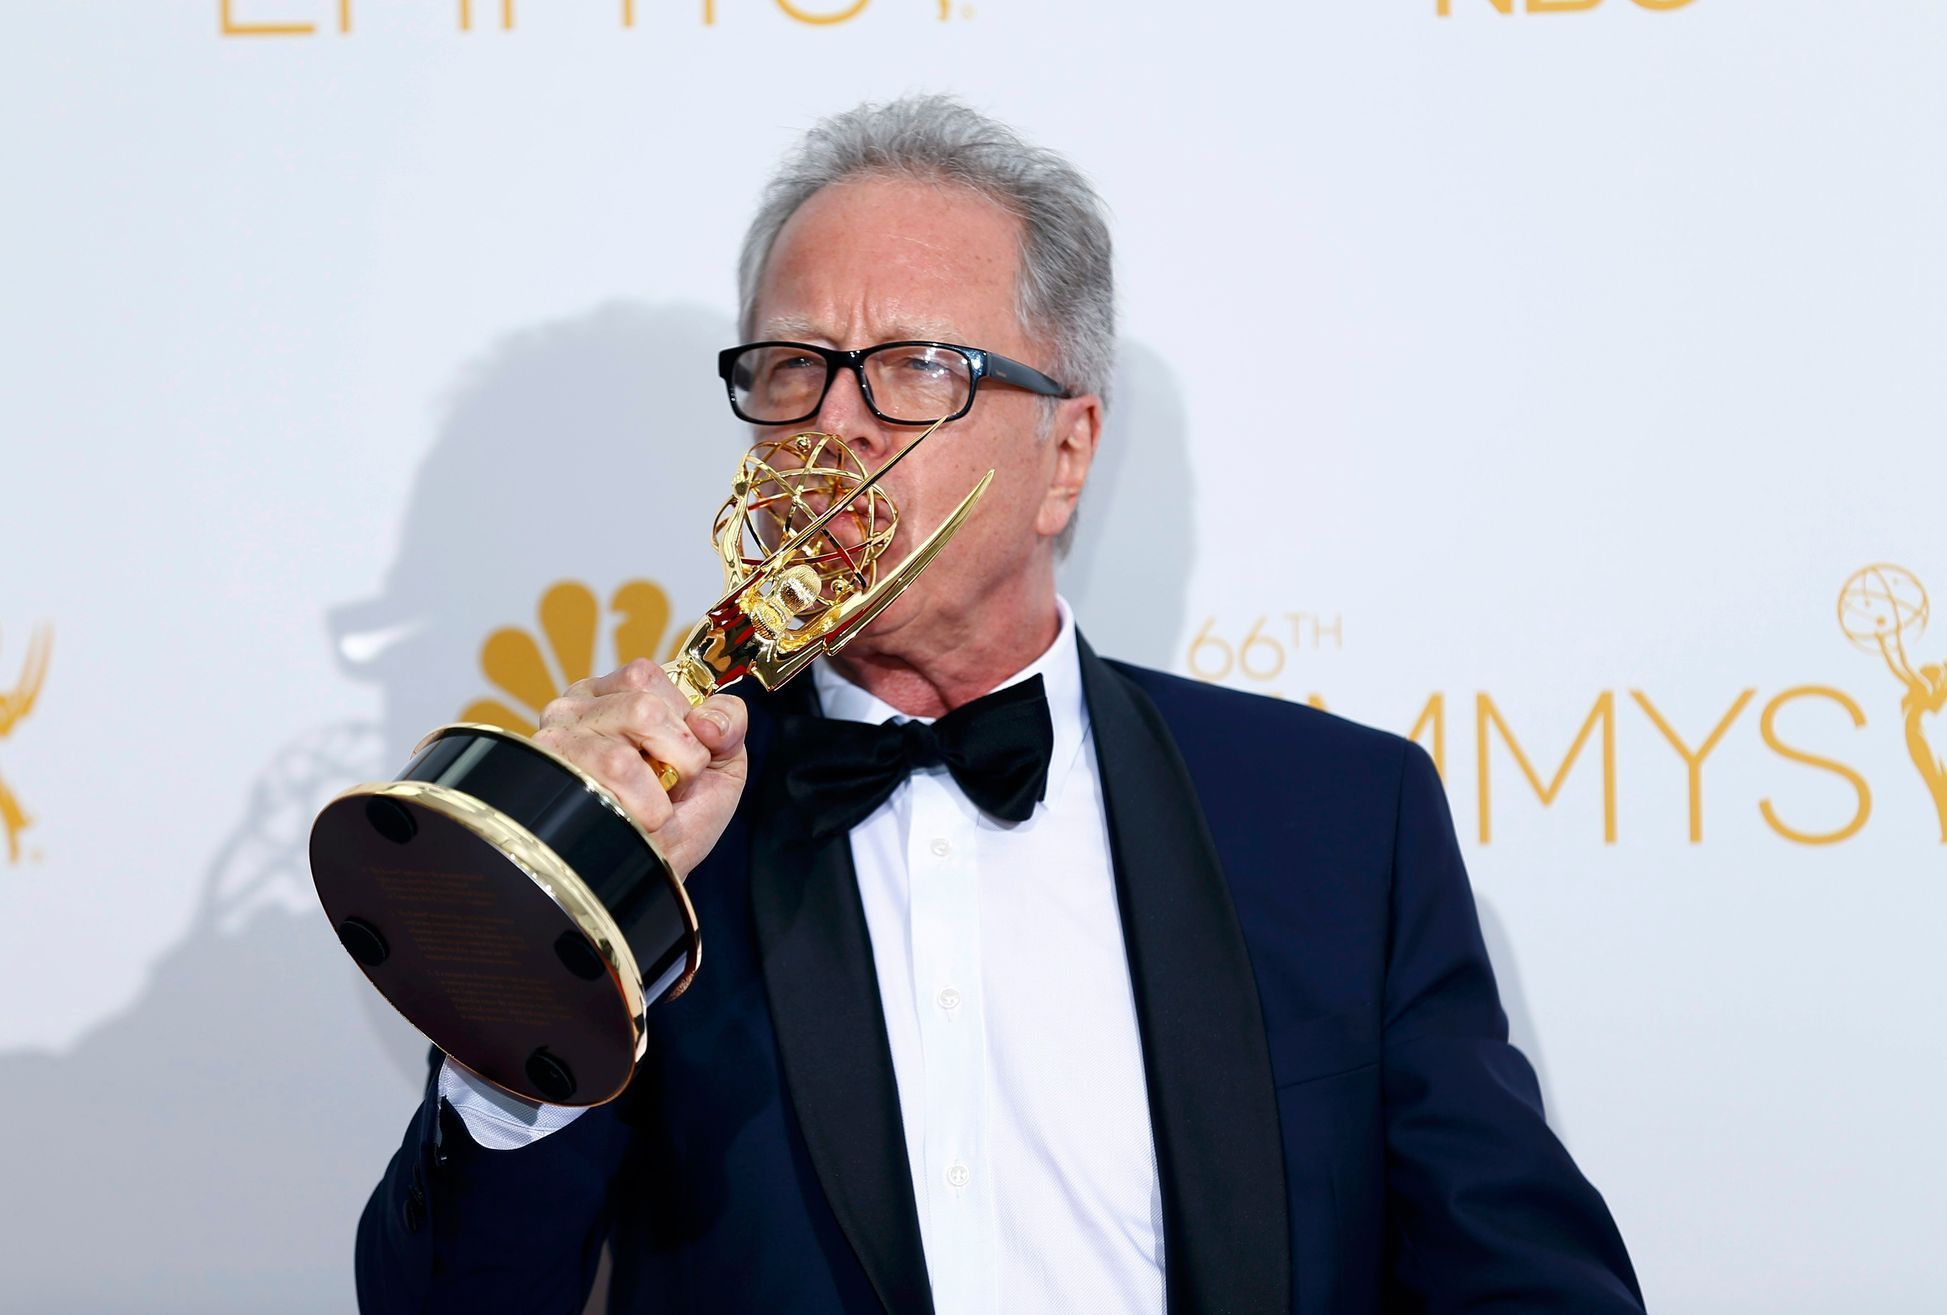 Director Colin Bucksey poses with his Outstanding Directing for a Miniseries, Movie or Dramatic Special Award for FX Networks &quot;Fargo&quot; at the 66th Primetime Emmy Awards in Los Angeles